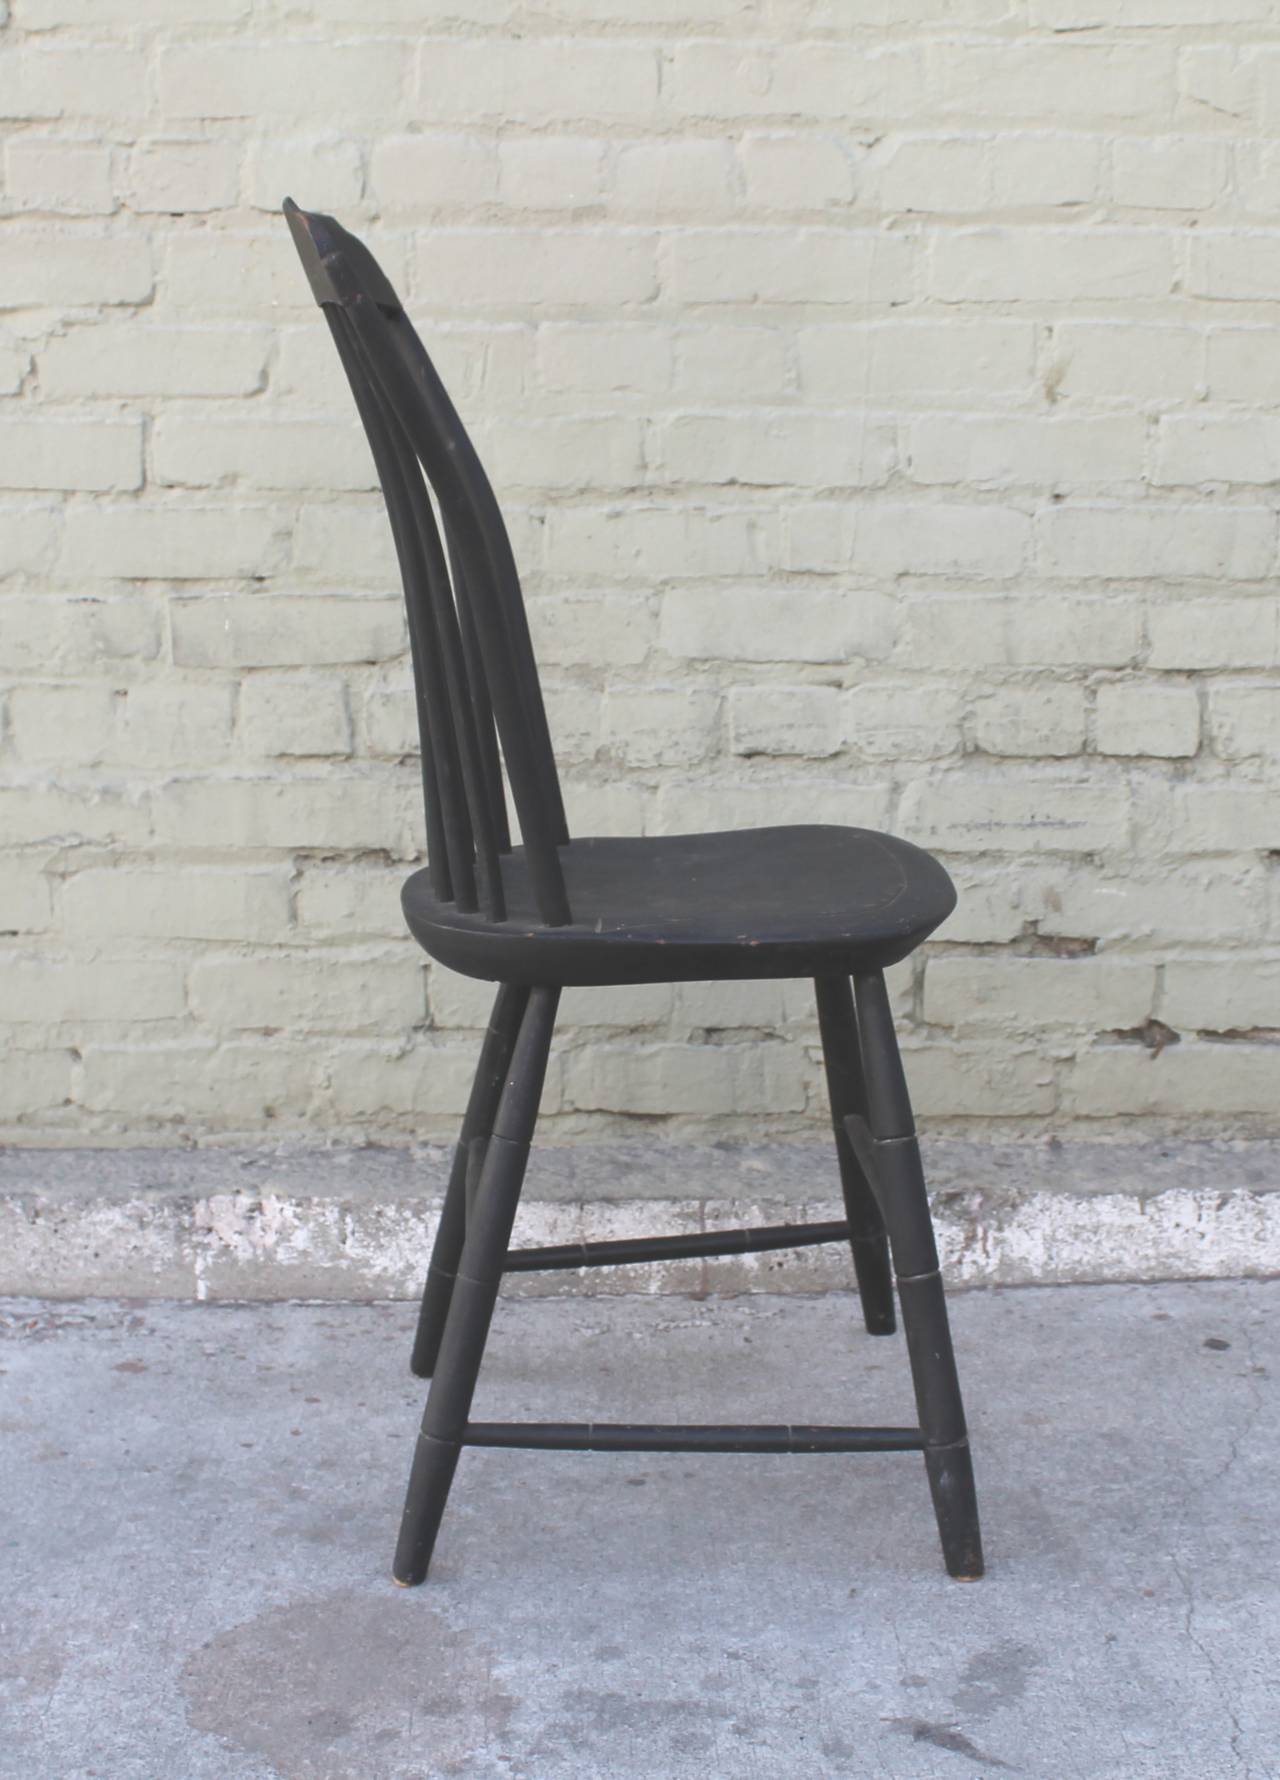 Original Black Painted Step Down New England Windsor Chair, Dated 1812 For Sale 1